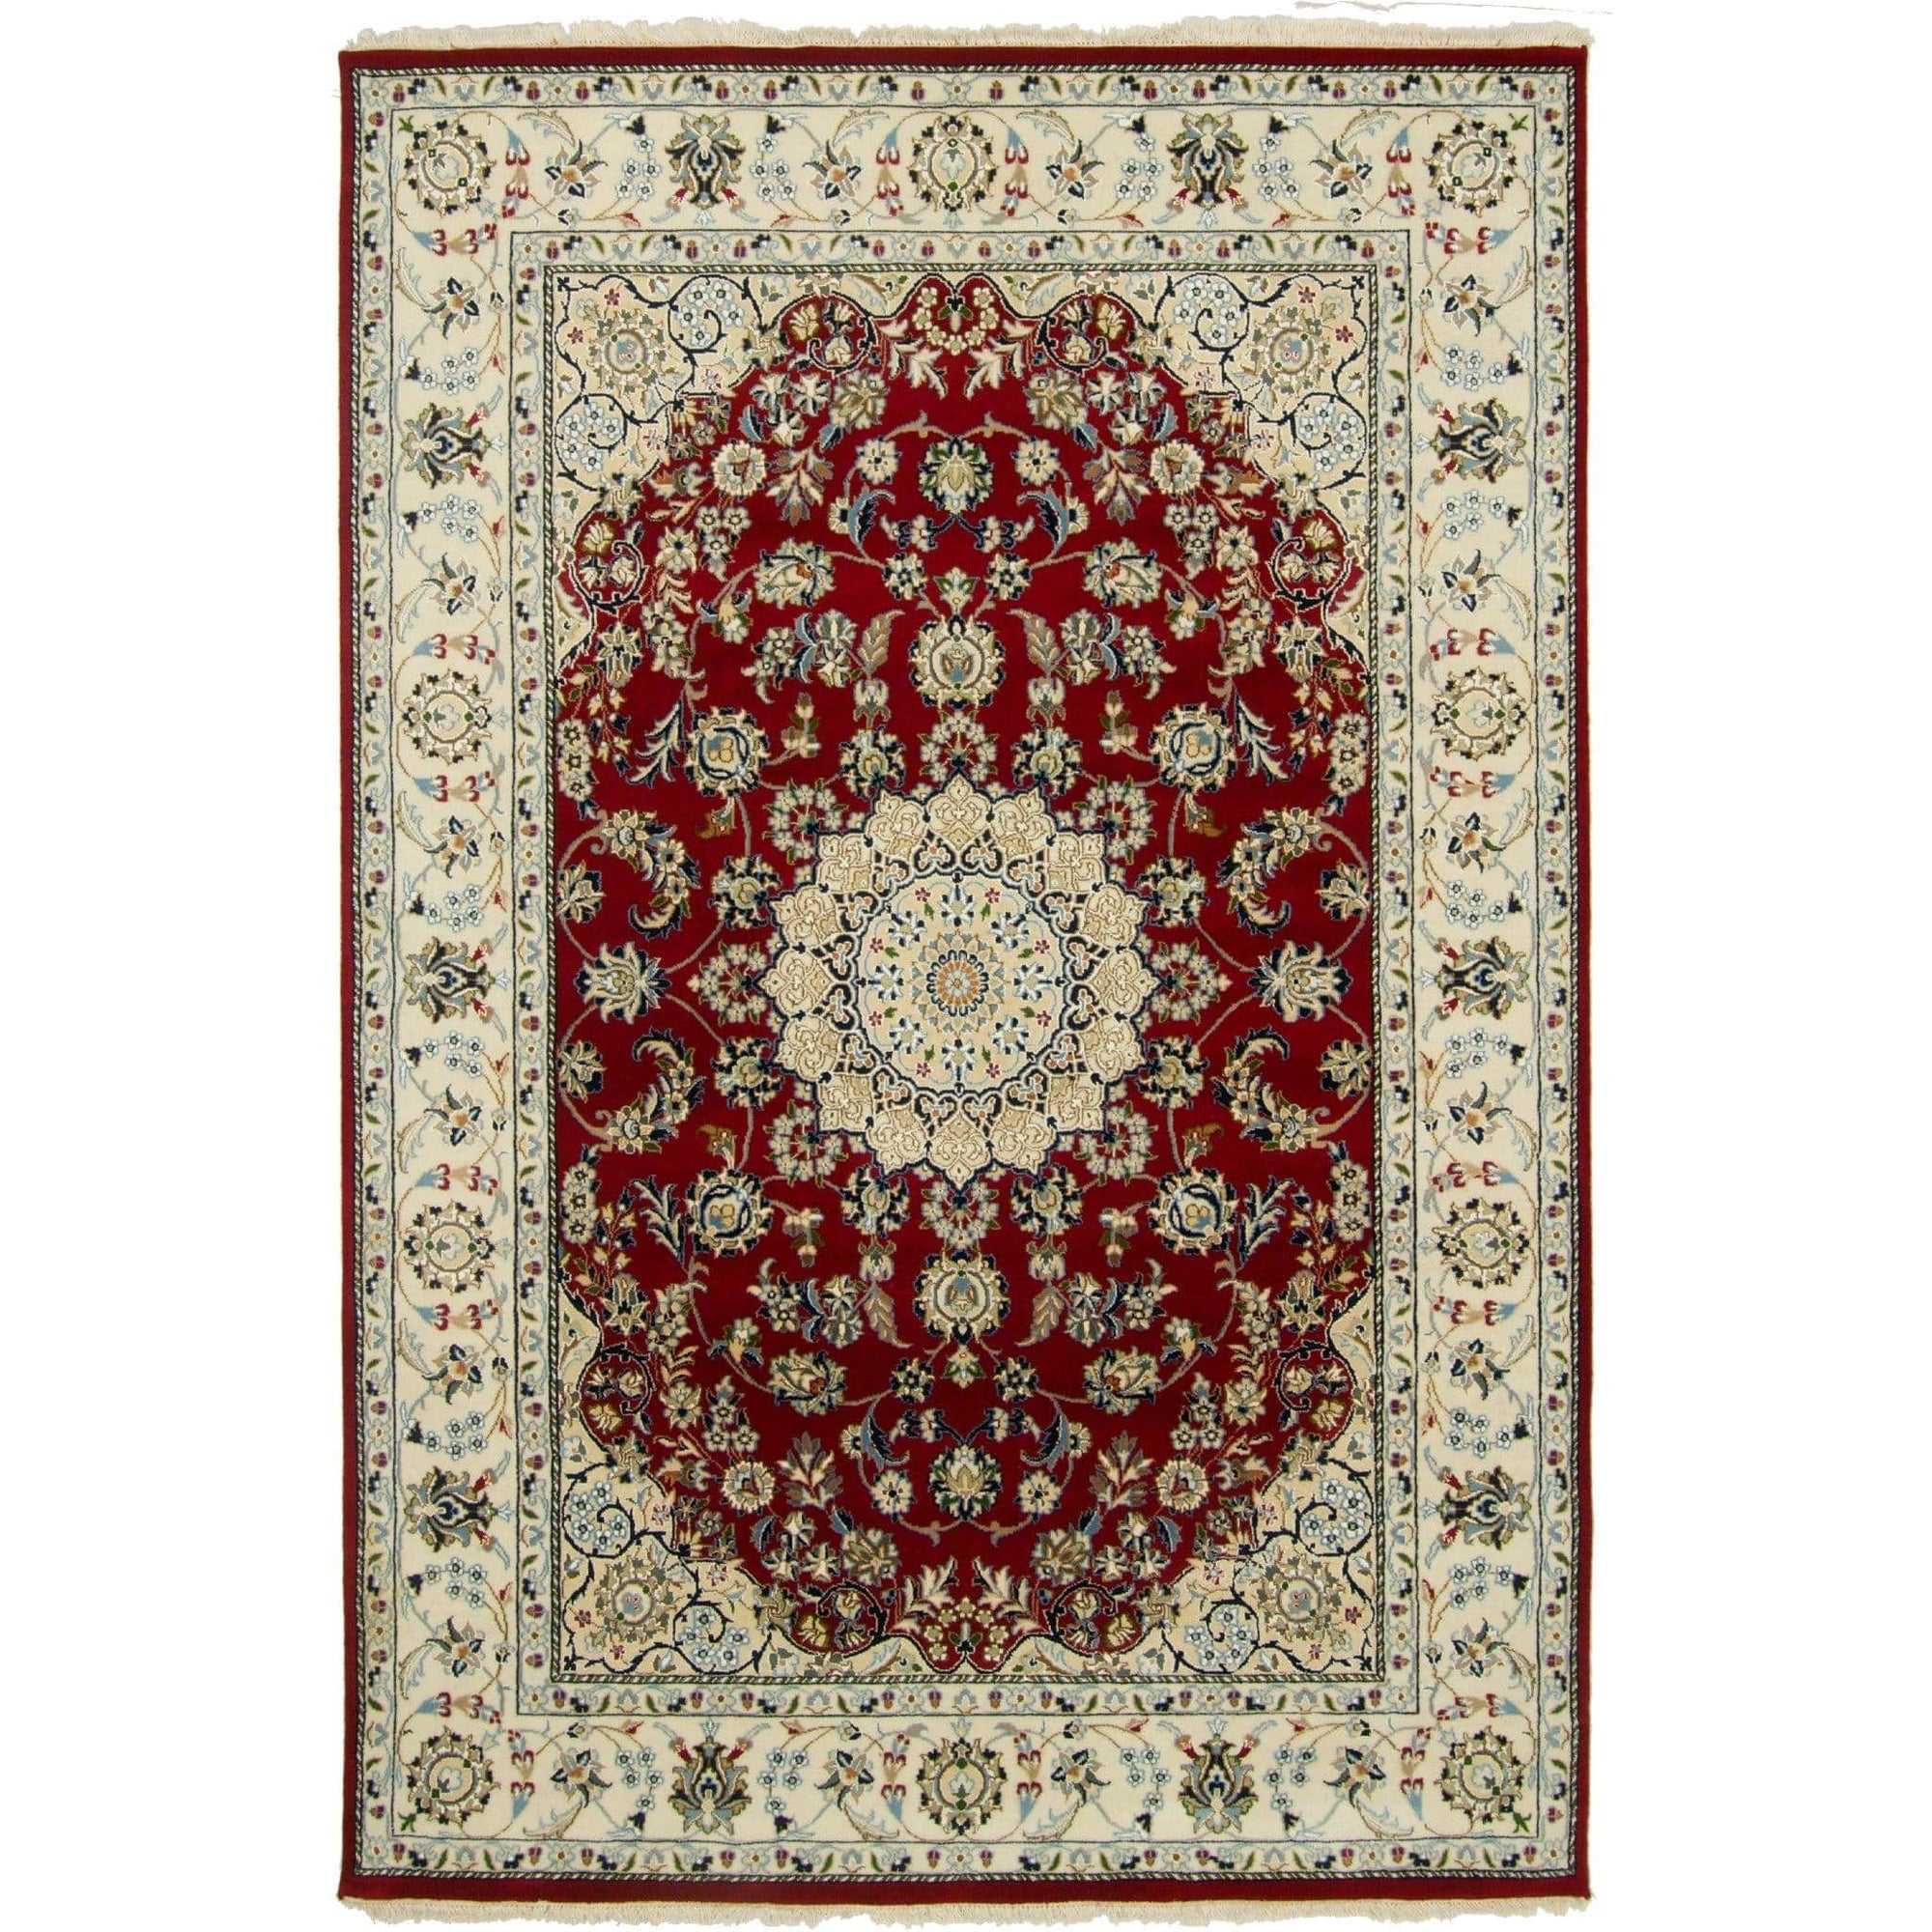 Fine Hand-knotted Wool & Silk Nain Rug 173cm x 249cm